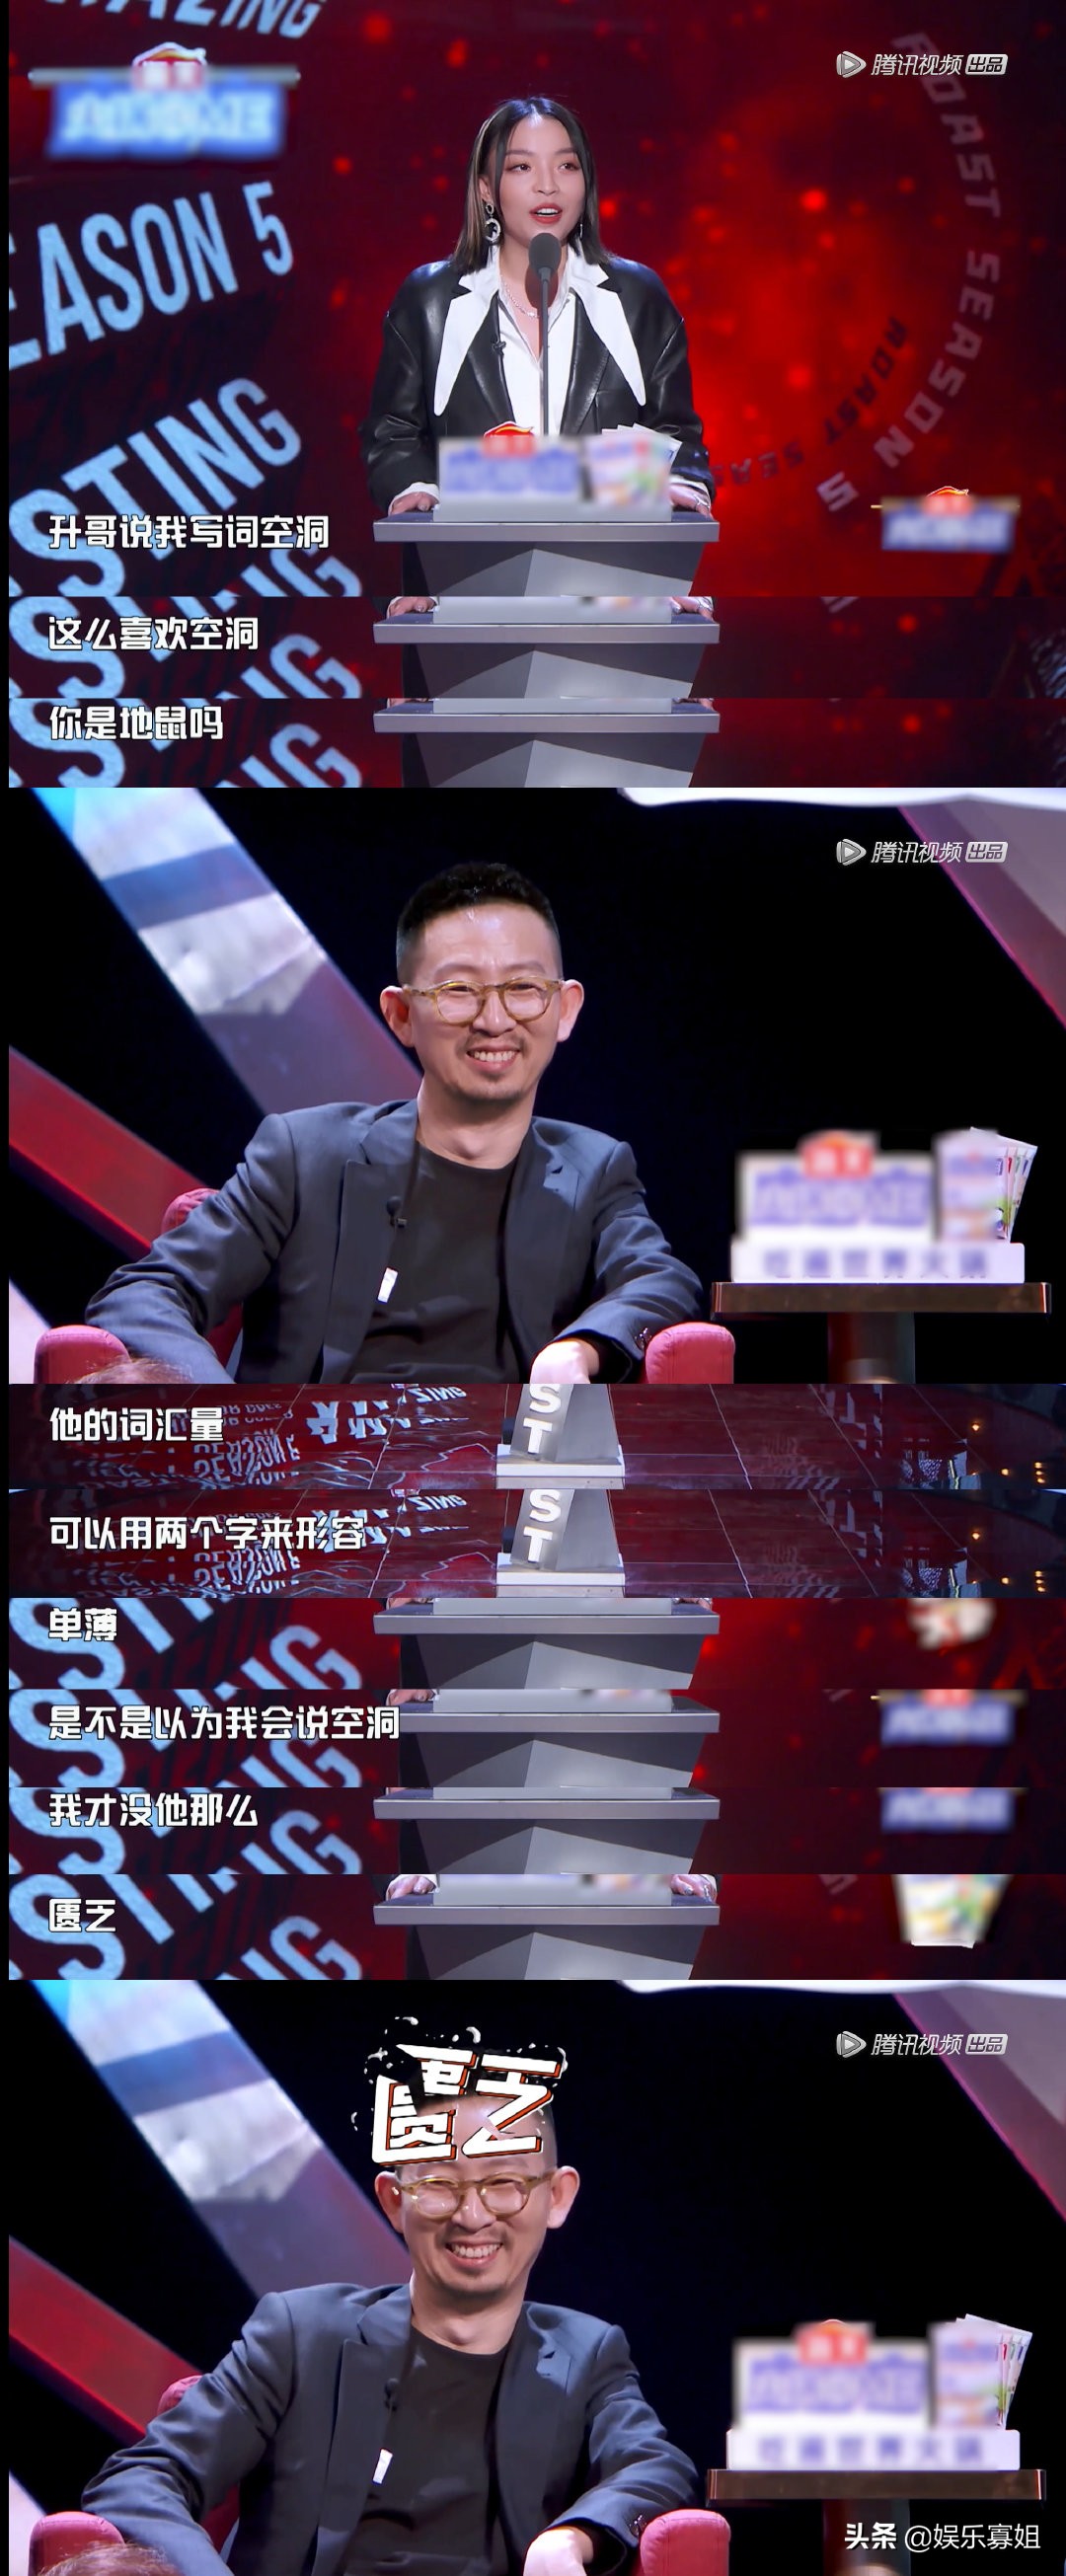 " the congress that spit groove " VaVa jumps over Ding Taisheng of honored guest main attack, the Ding Taisheng that spit groove does not have culture